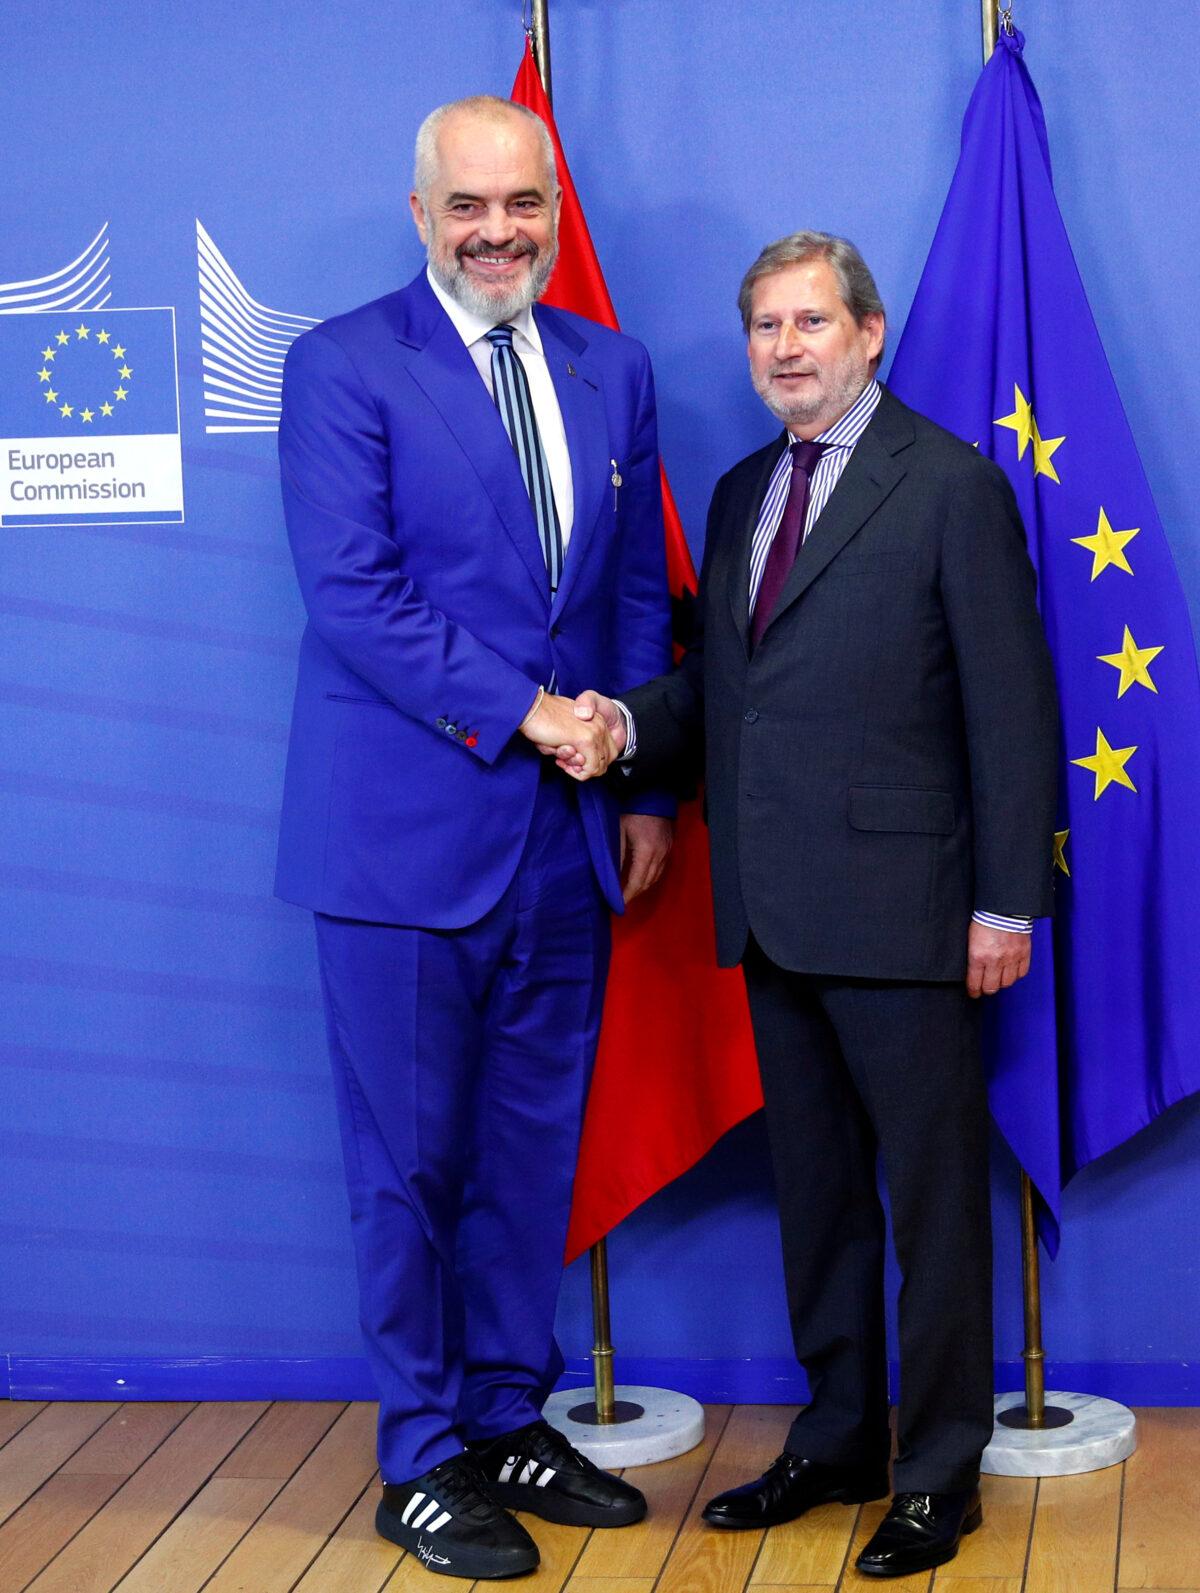 Albanian Prime Minister Edi Rama (L) poses with European Neighborhood Policy and Enlargement Negotiations Commissioner Johannes Hahn (R) at the EU Commission headquarters in Brussels, Belgium on Oct. 17, 2019. (Francois Lenoir/Reuters,File Photo)